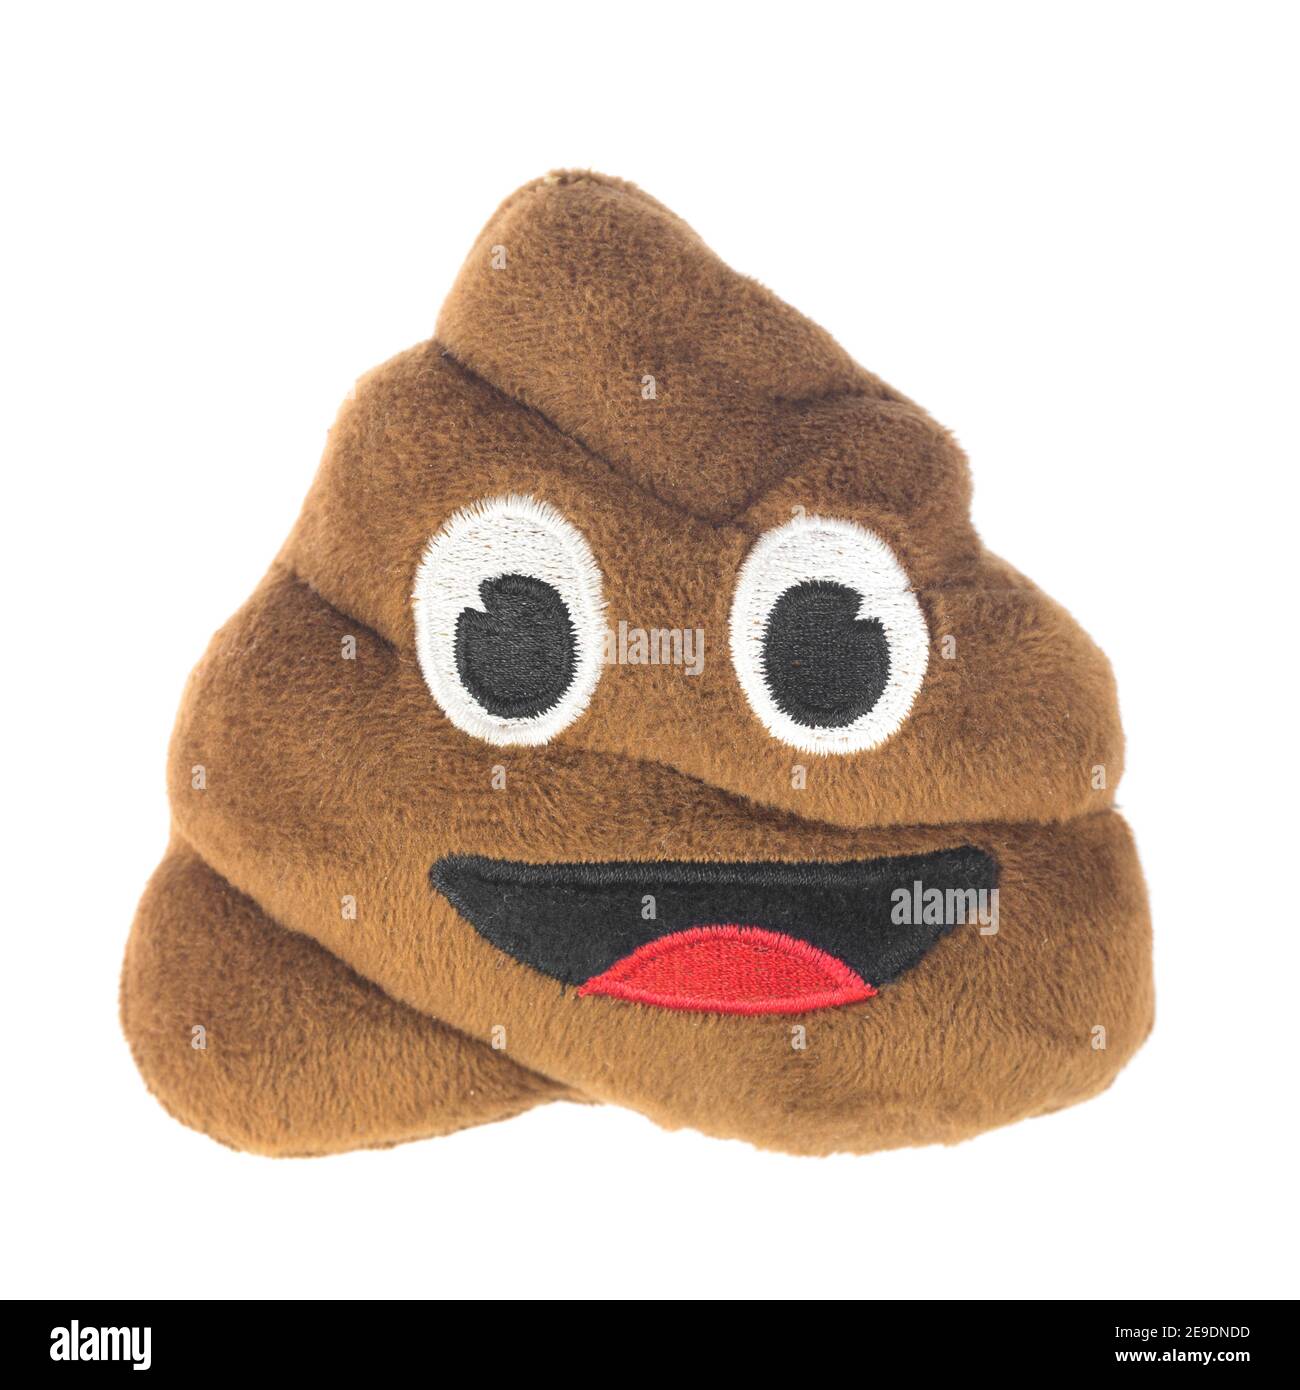 Pile of poo emoticon soft pillow Stock Photo